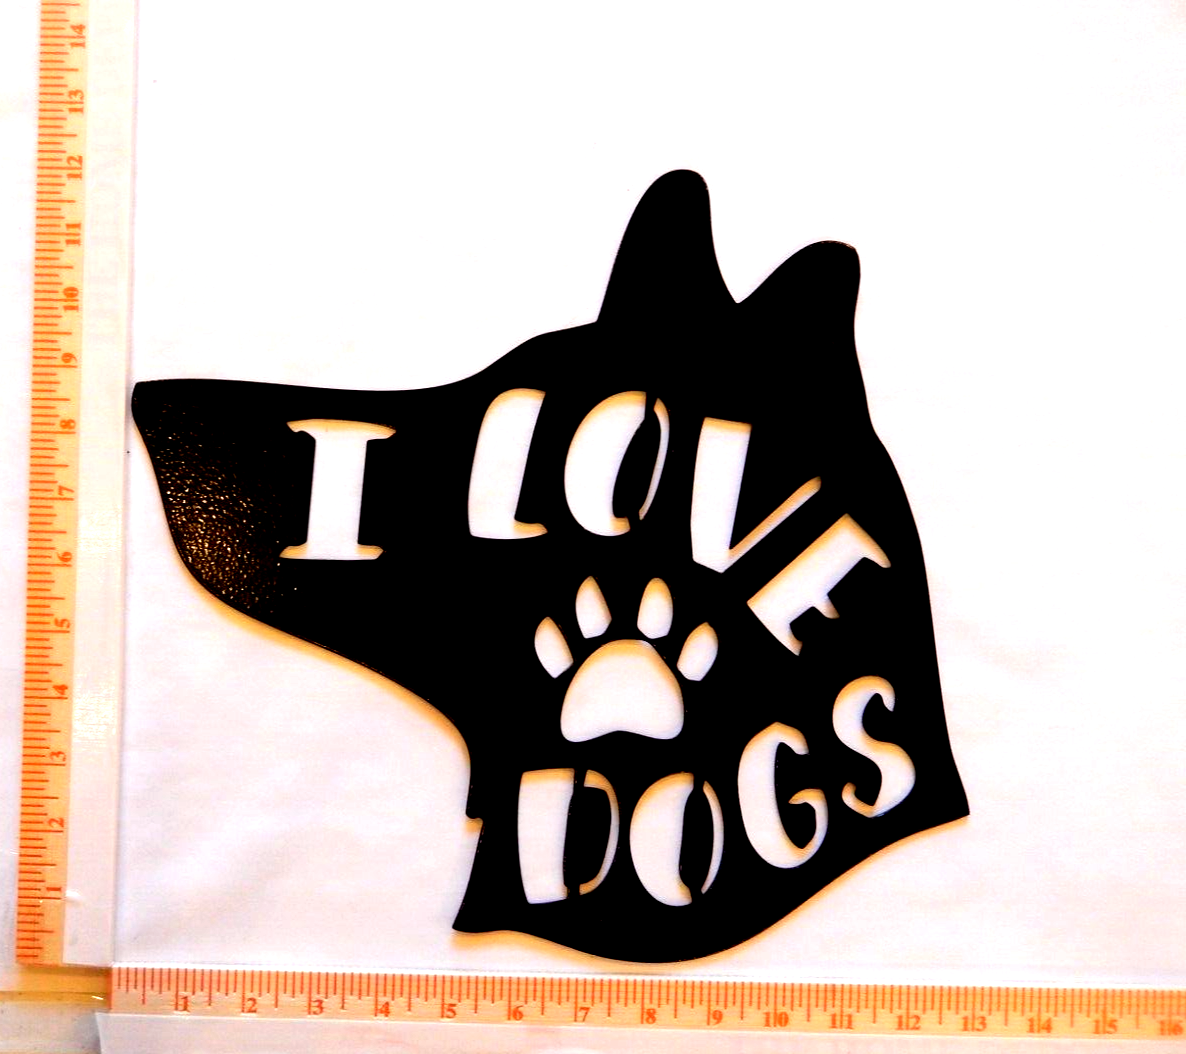 "I LOVE PAW DOGS" 14 gauge thick Black Painted  Metal Wall Art = 12" x 12"